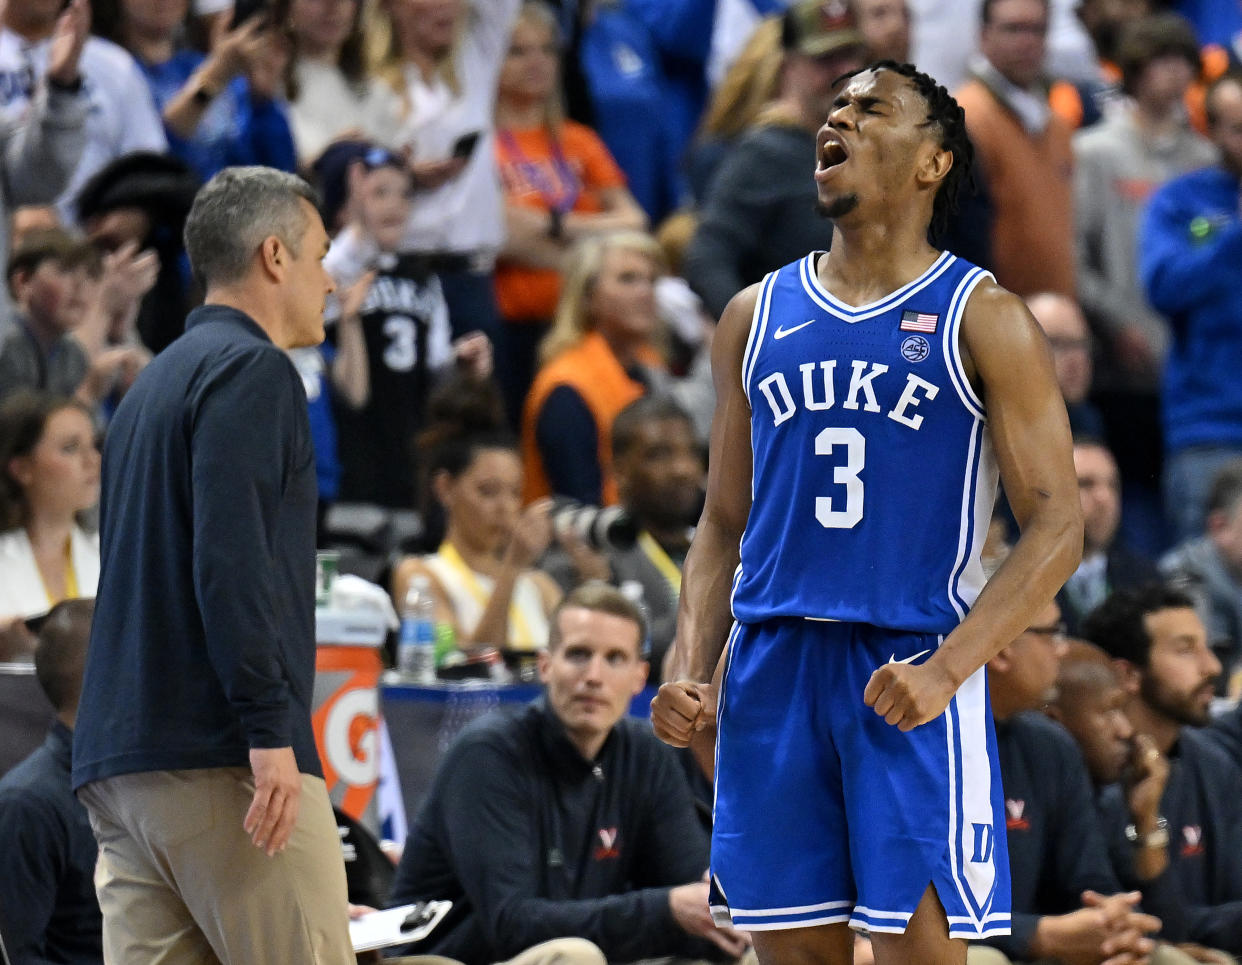 Jeremy Roach and the Duke Blue Devils looked good in winning the ACC tournament. (Photo by Grant Halverson/Getty Images)